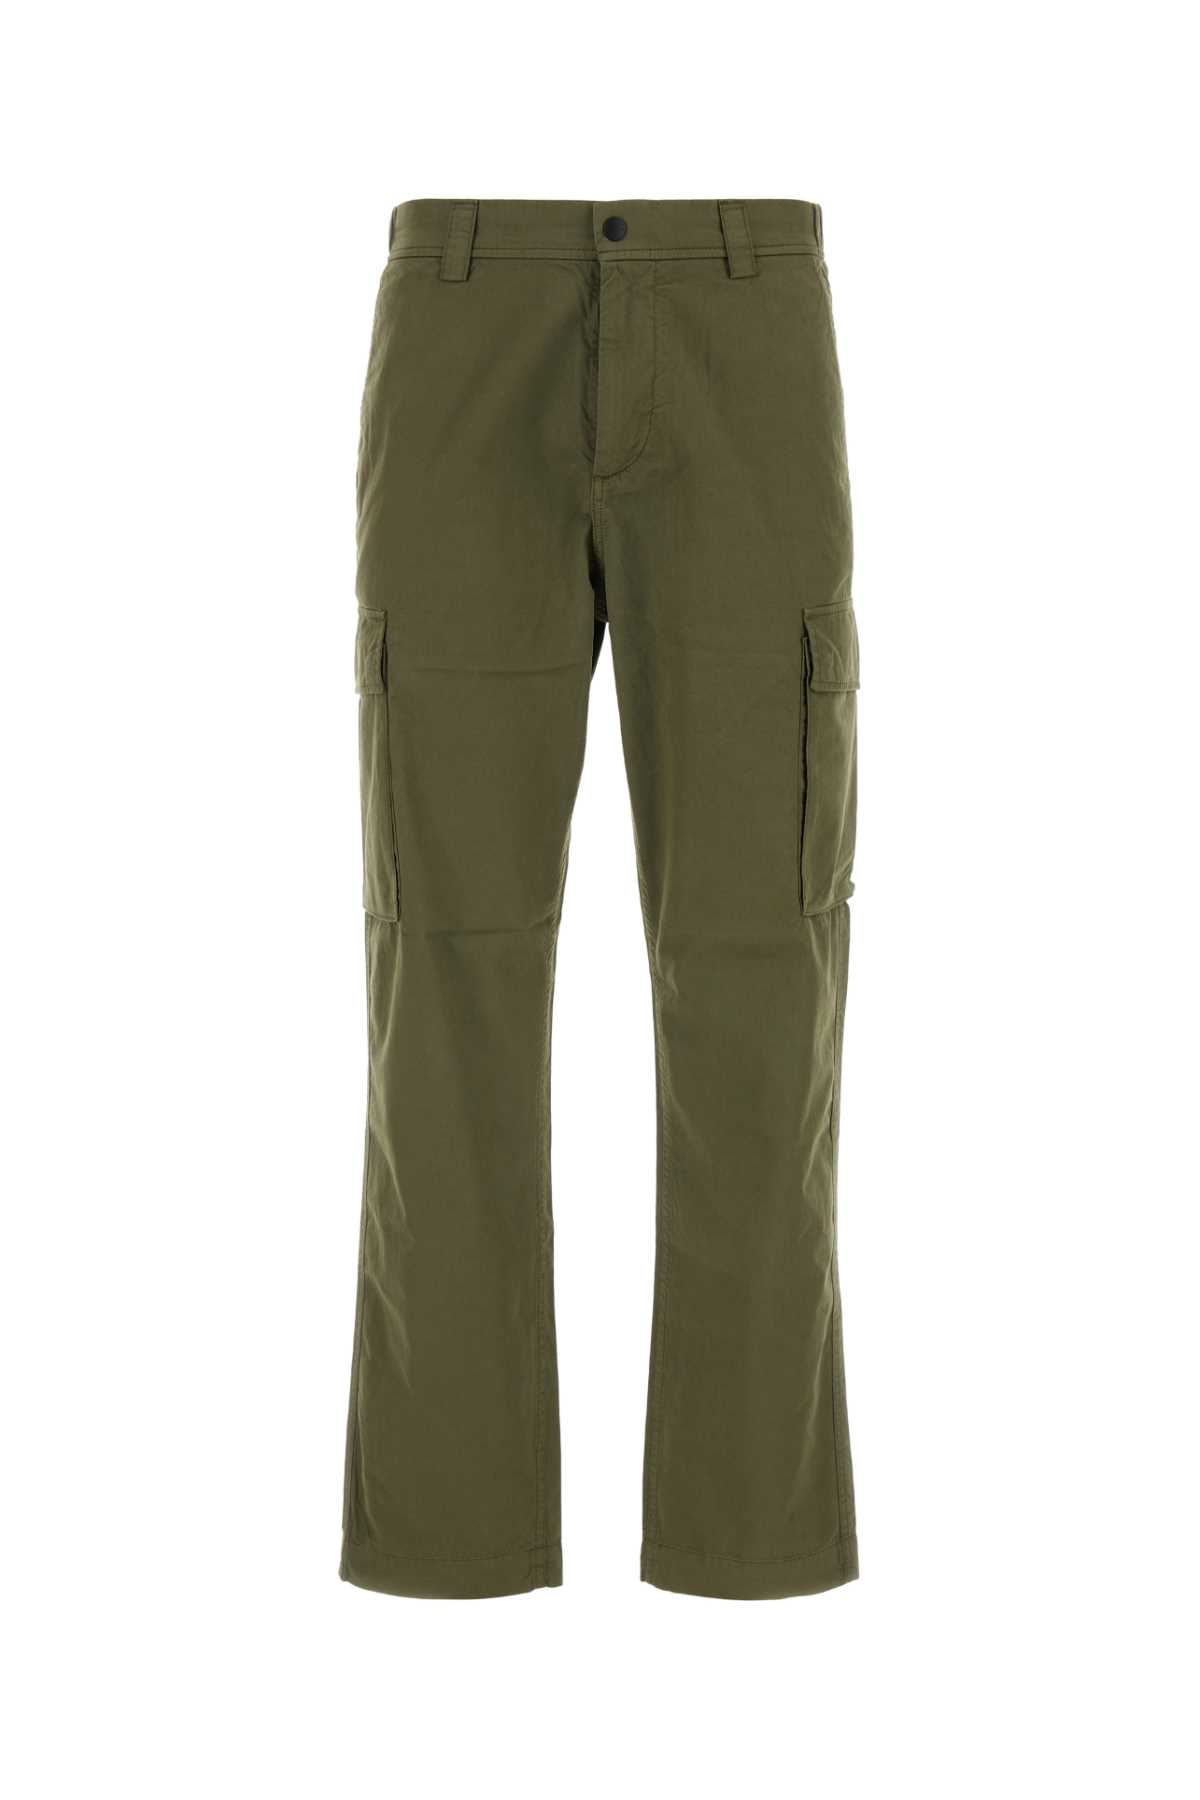 Army Green Cotton Pant